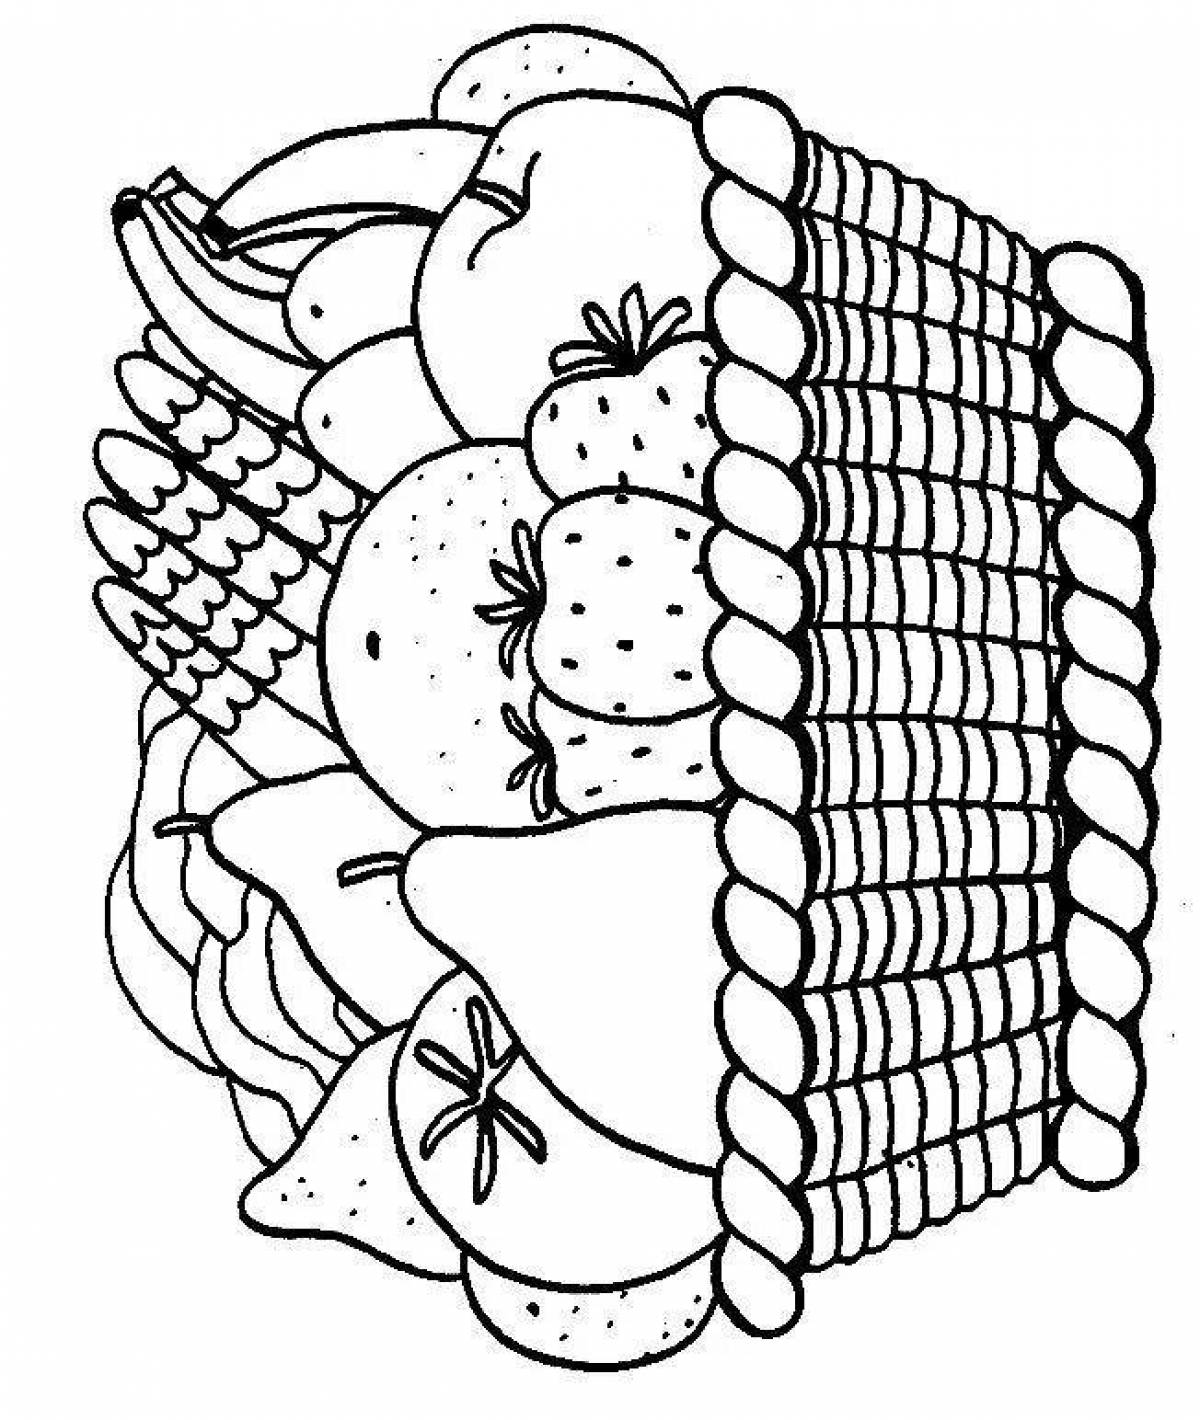 Adorable colored fruit basket coloring book